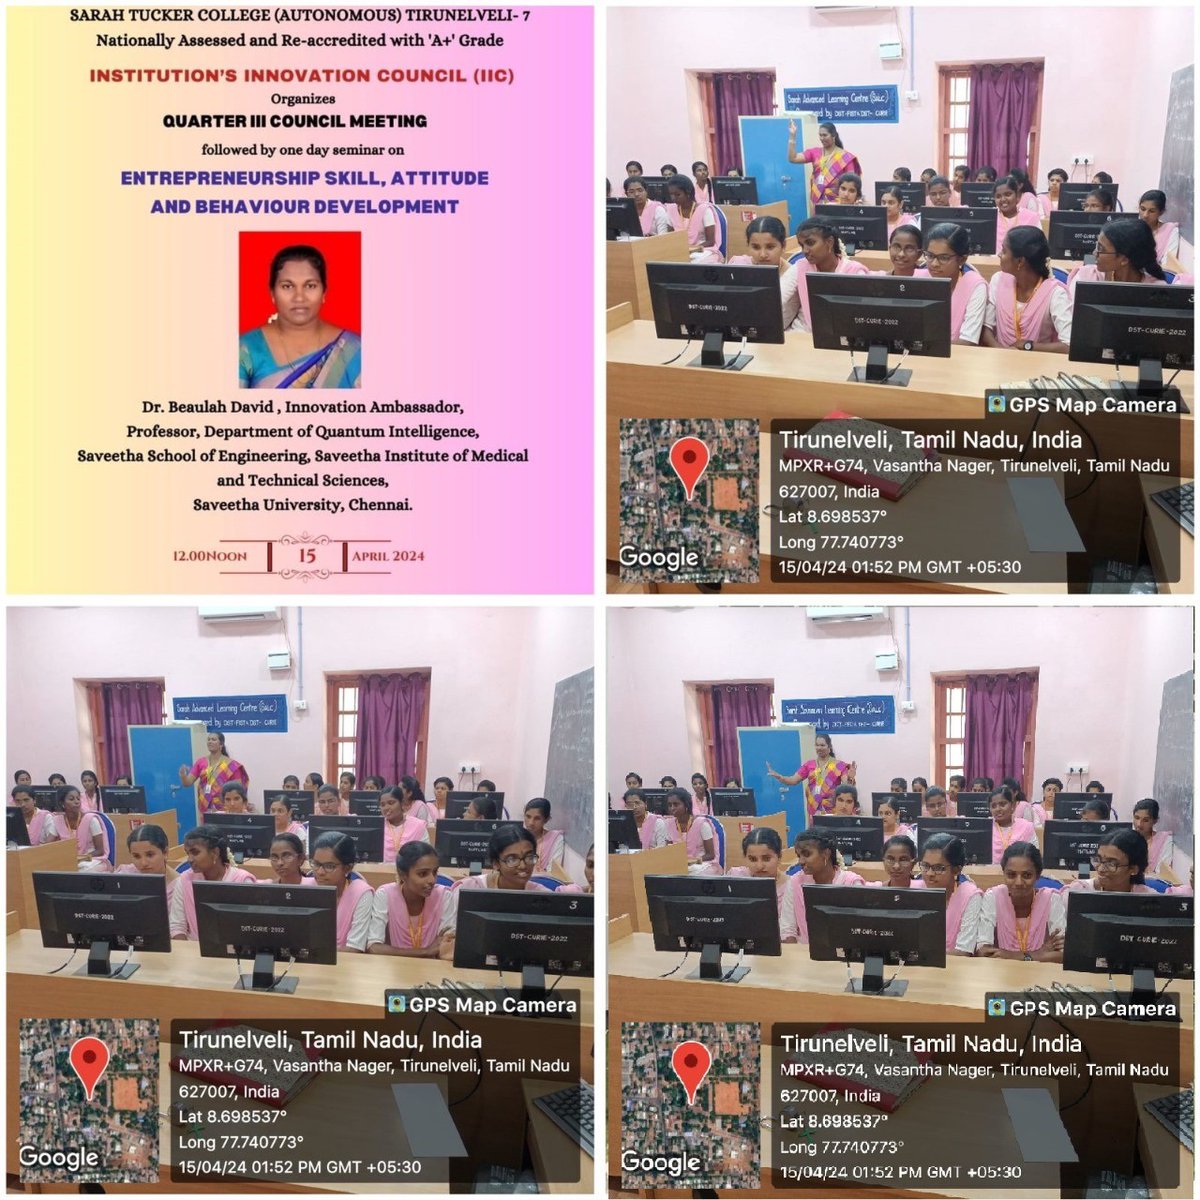 Organized IIC Activity for IIC Referred Institution Sarah Tucker College by Mentor Institute Saveetha Institute of Medical and Technical Sciences on 16 Apr 2024. #iic #simats #saveethabreeze #mhrdinnovationcell #iicreferredcollege #innovation #entrepreneurship #sarahtuckercollege